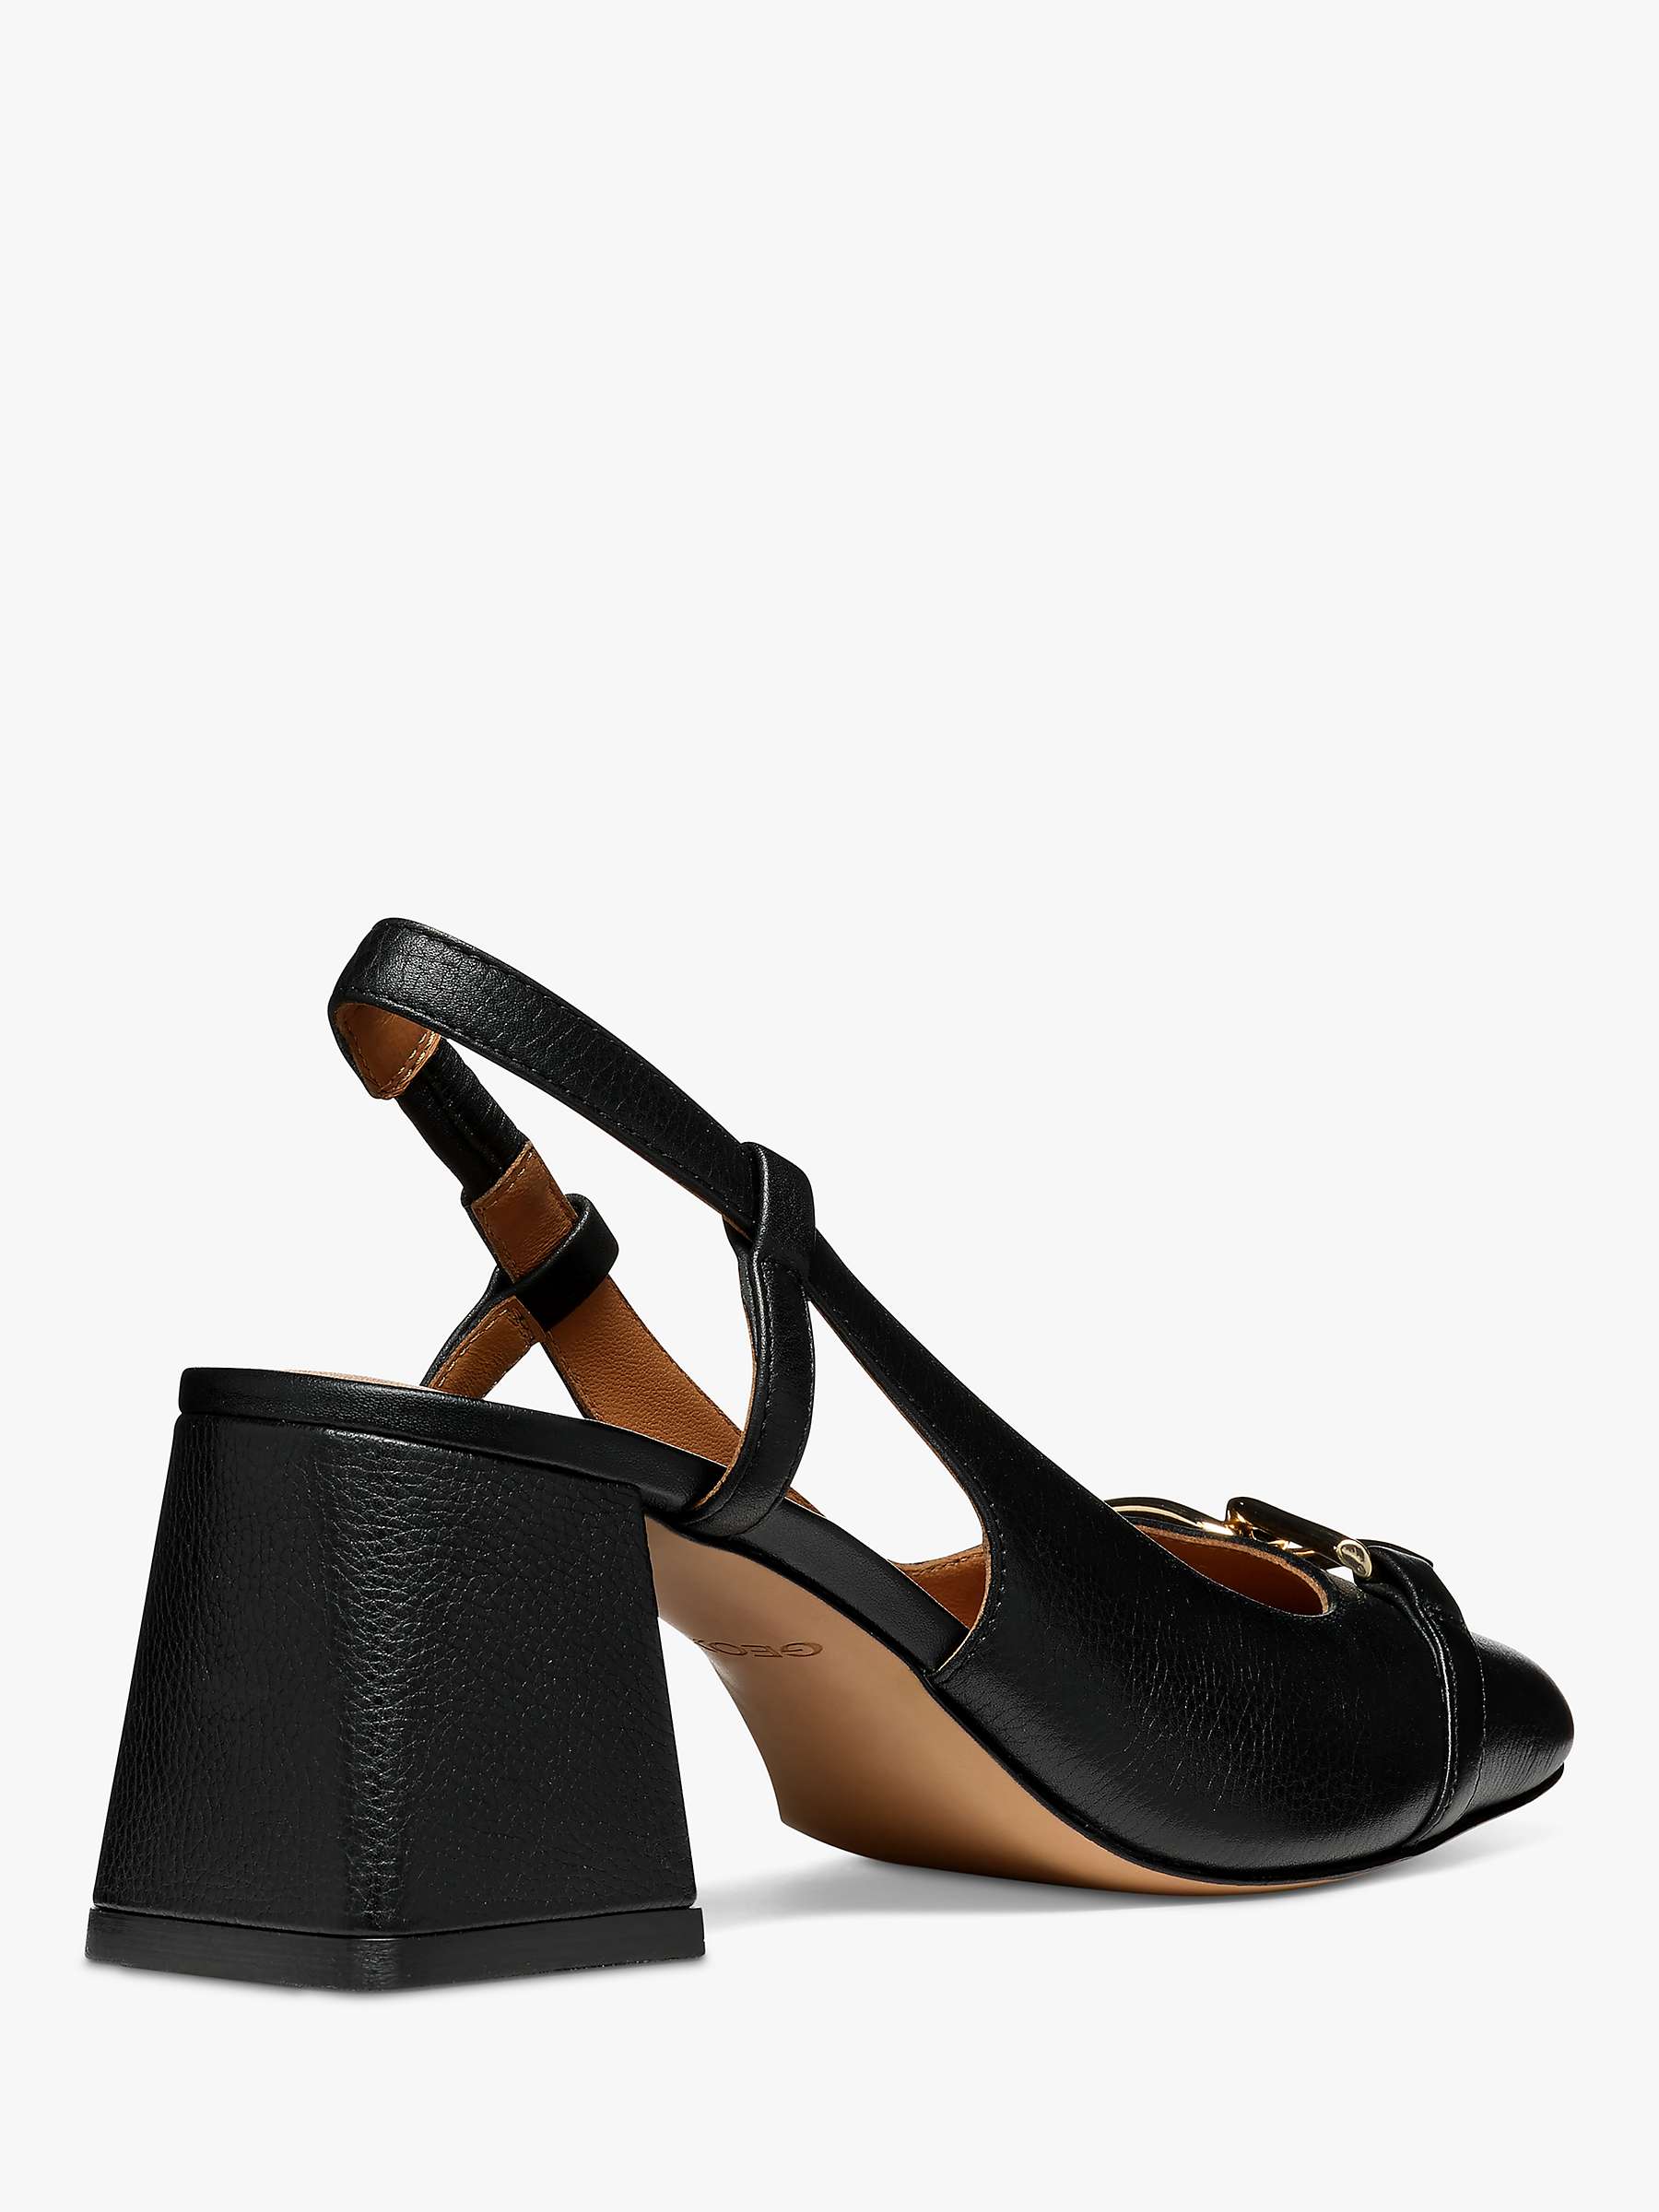 Buy Geox Coronilla Square Toe Leather Slingback Court Shoes Online at johnlewis.com